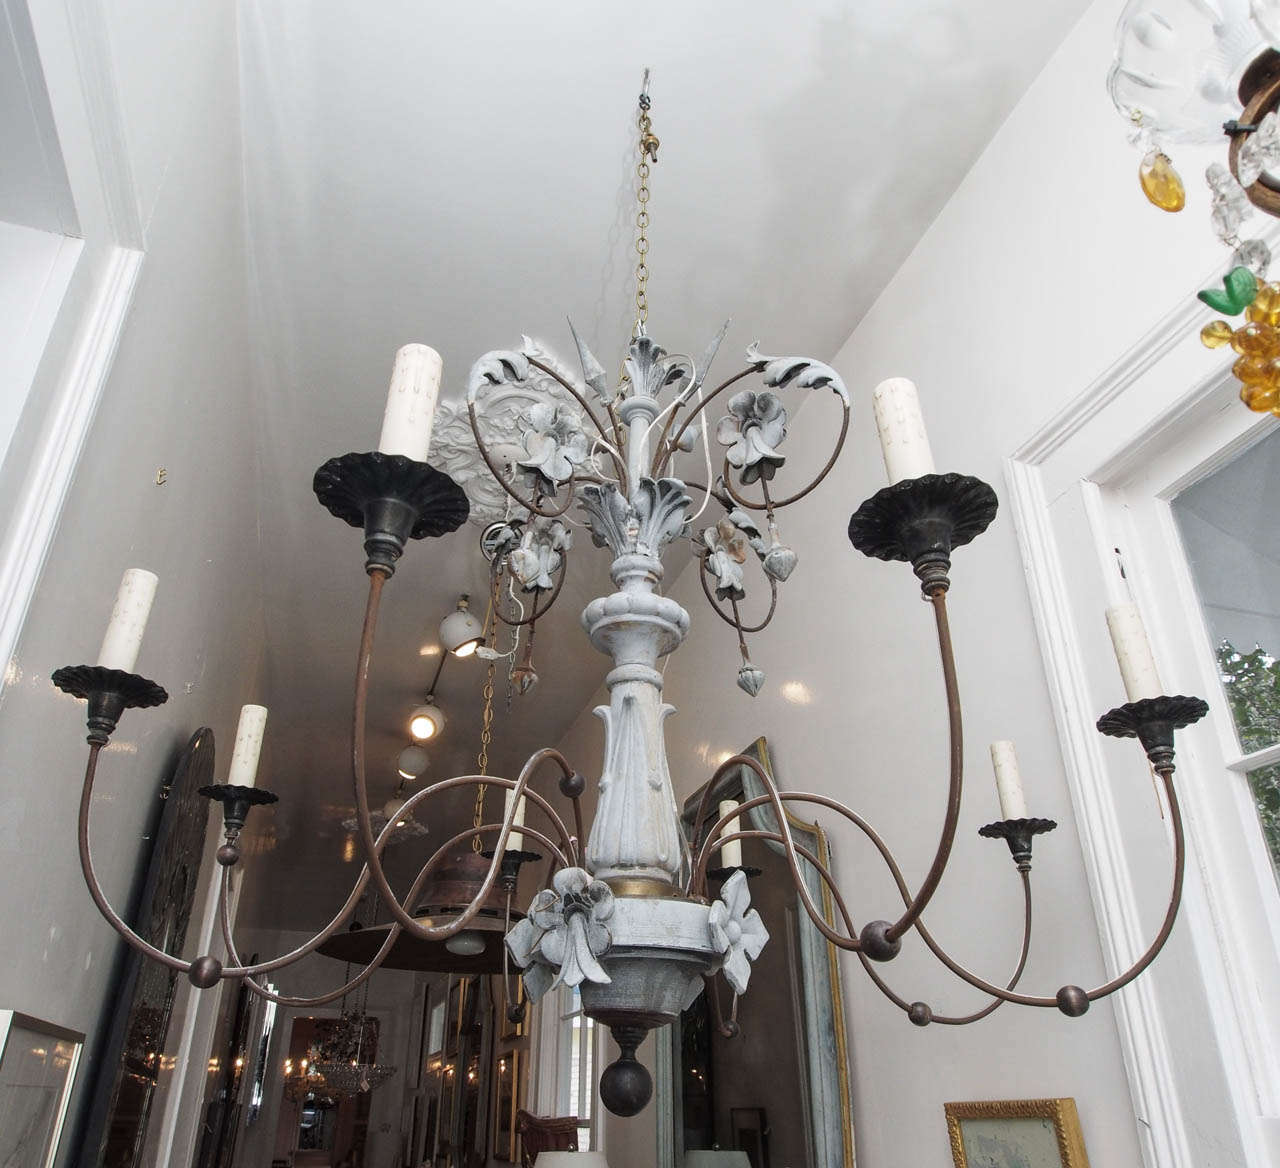 Oversized zinc chandelier with 8 lights and a swirling floral motif.